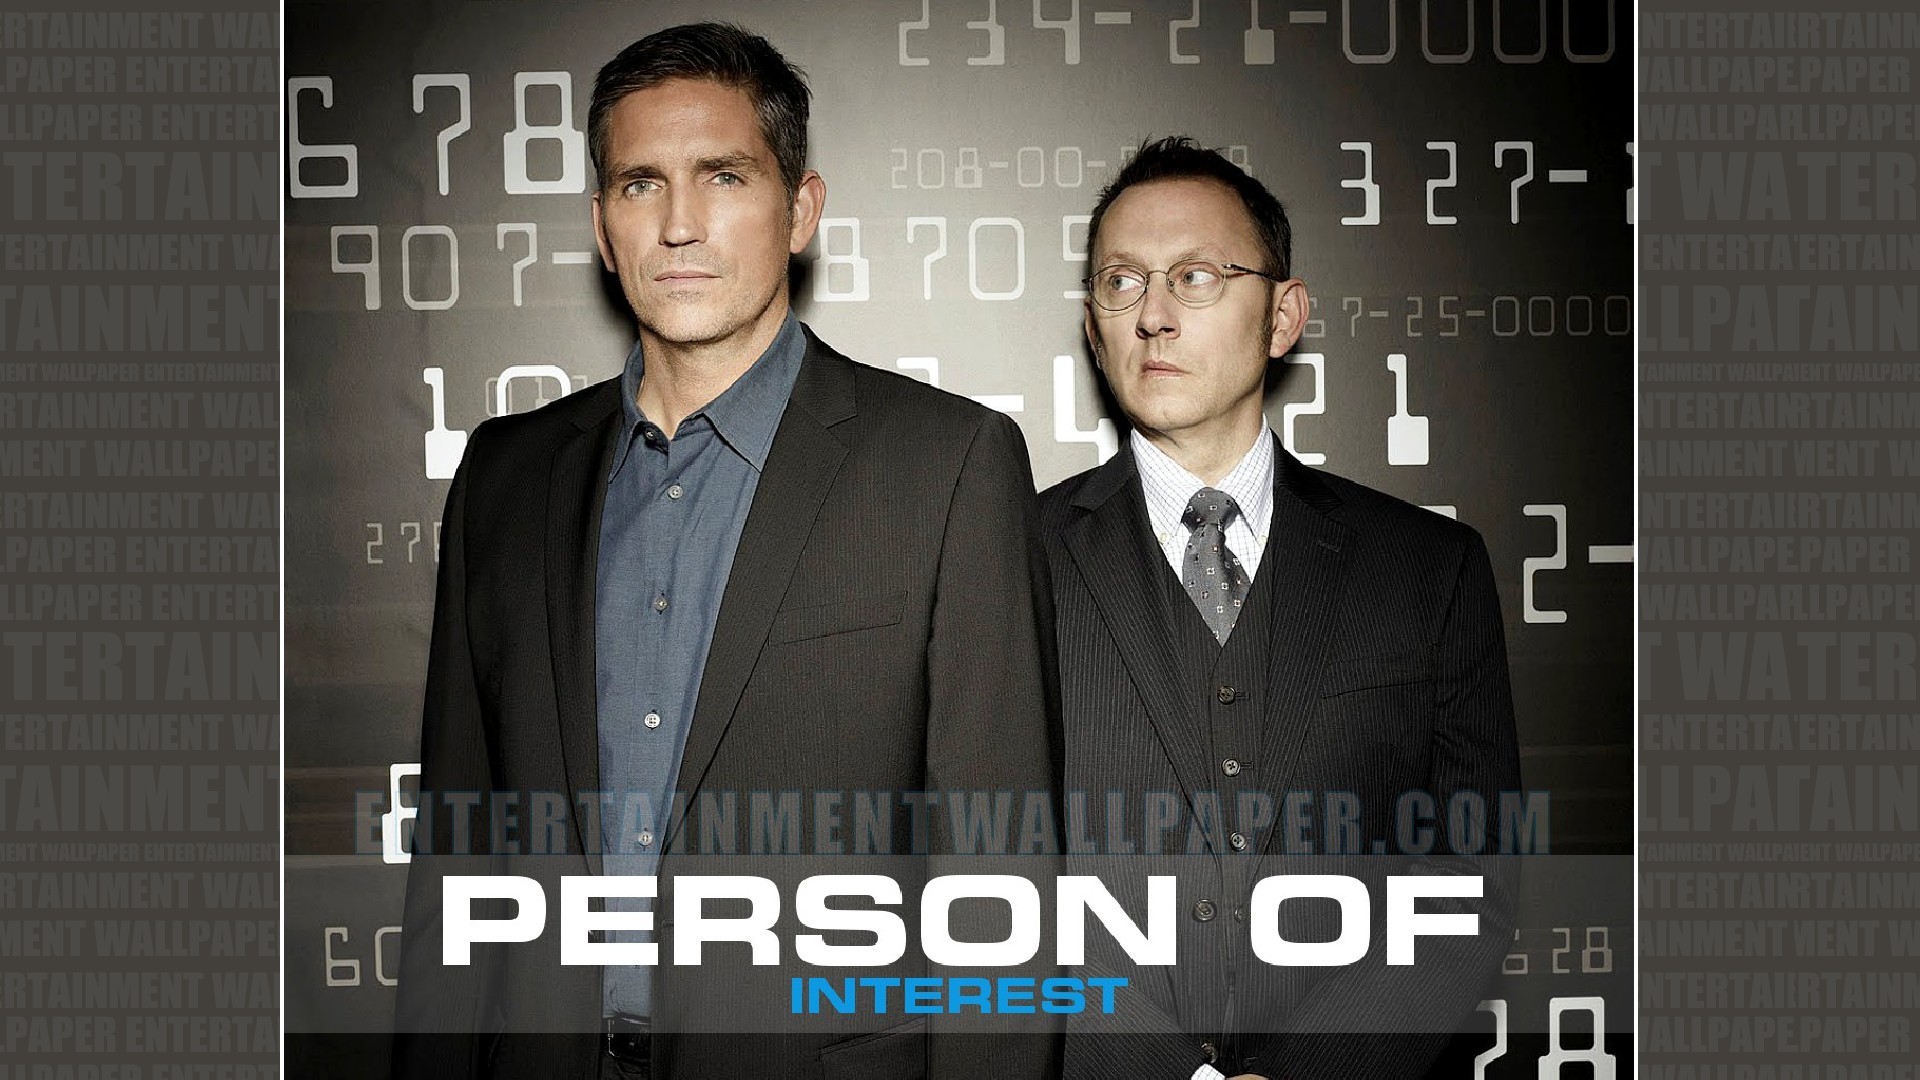 1920x1080 Person of Interest Wallpaper - Original size, download now.